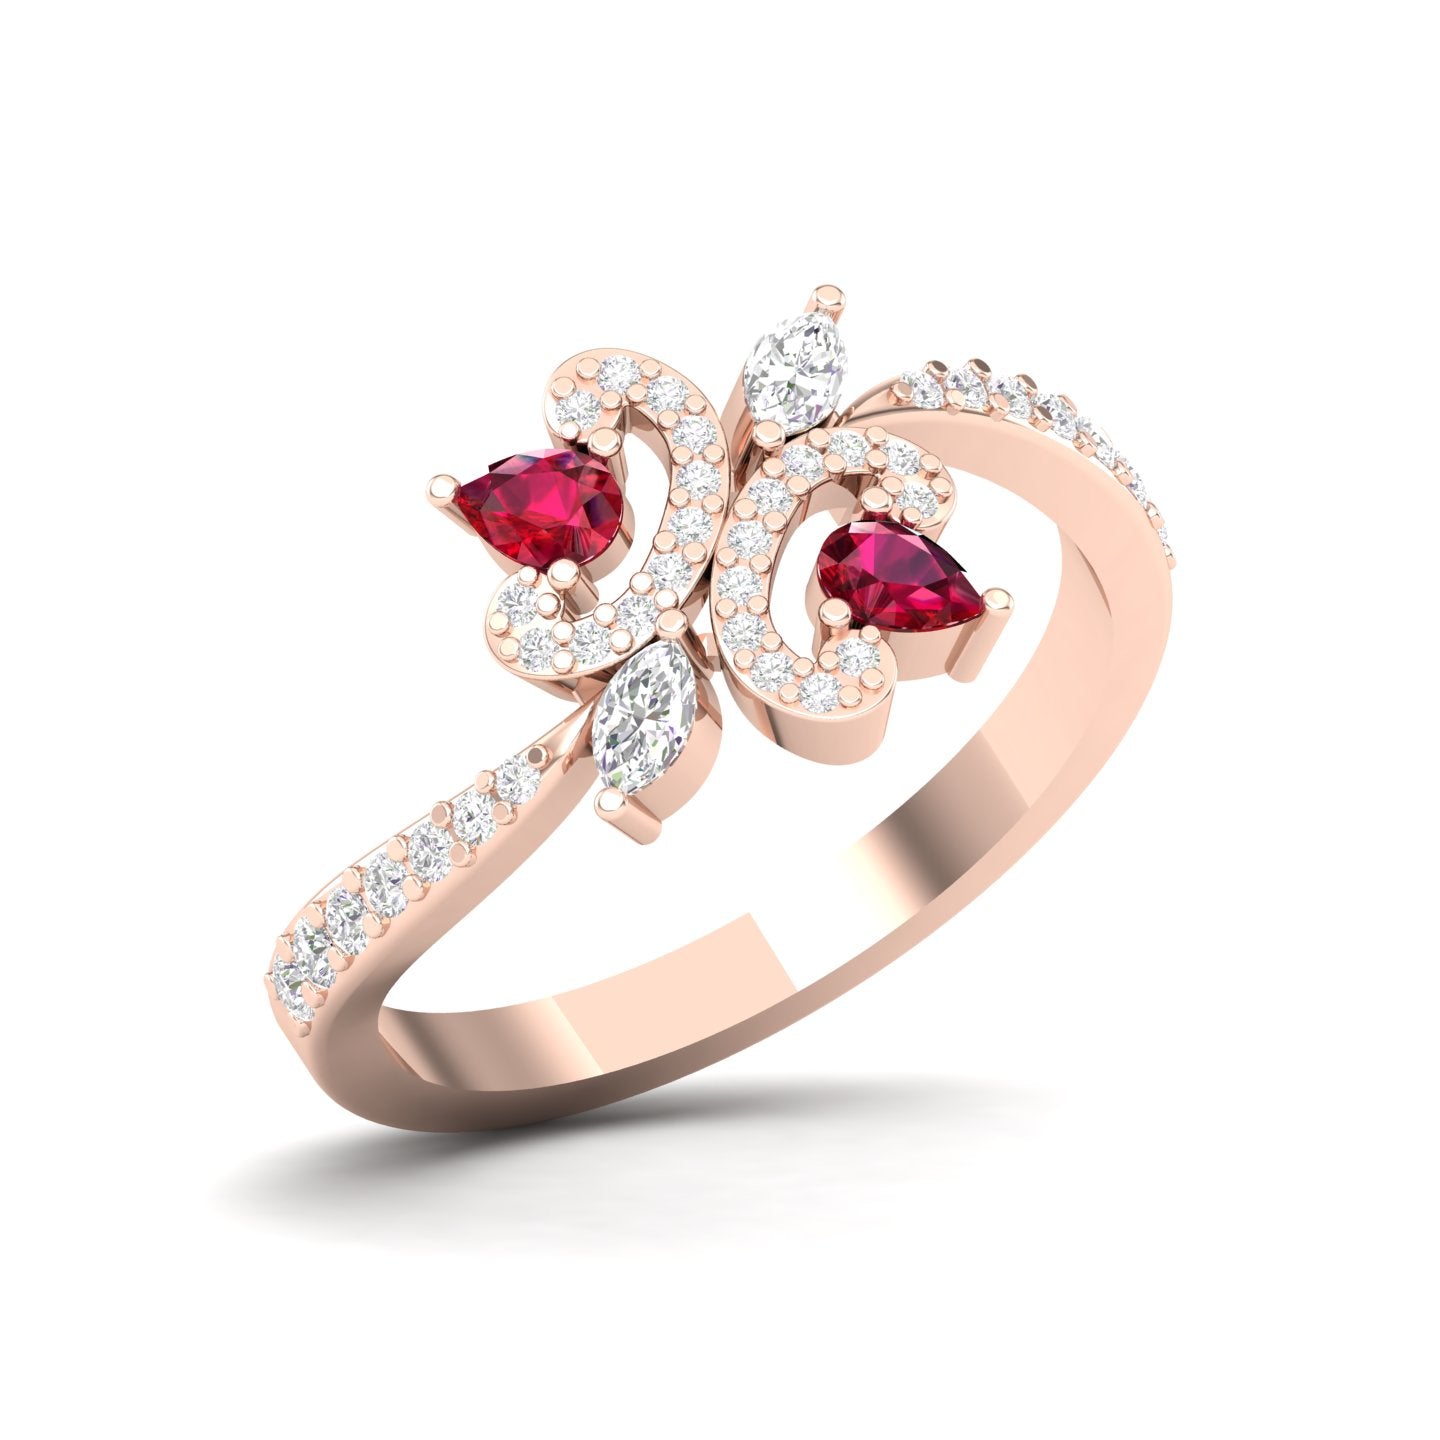 Platinum Pear Cut Ruby Ring With Diamond Halo